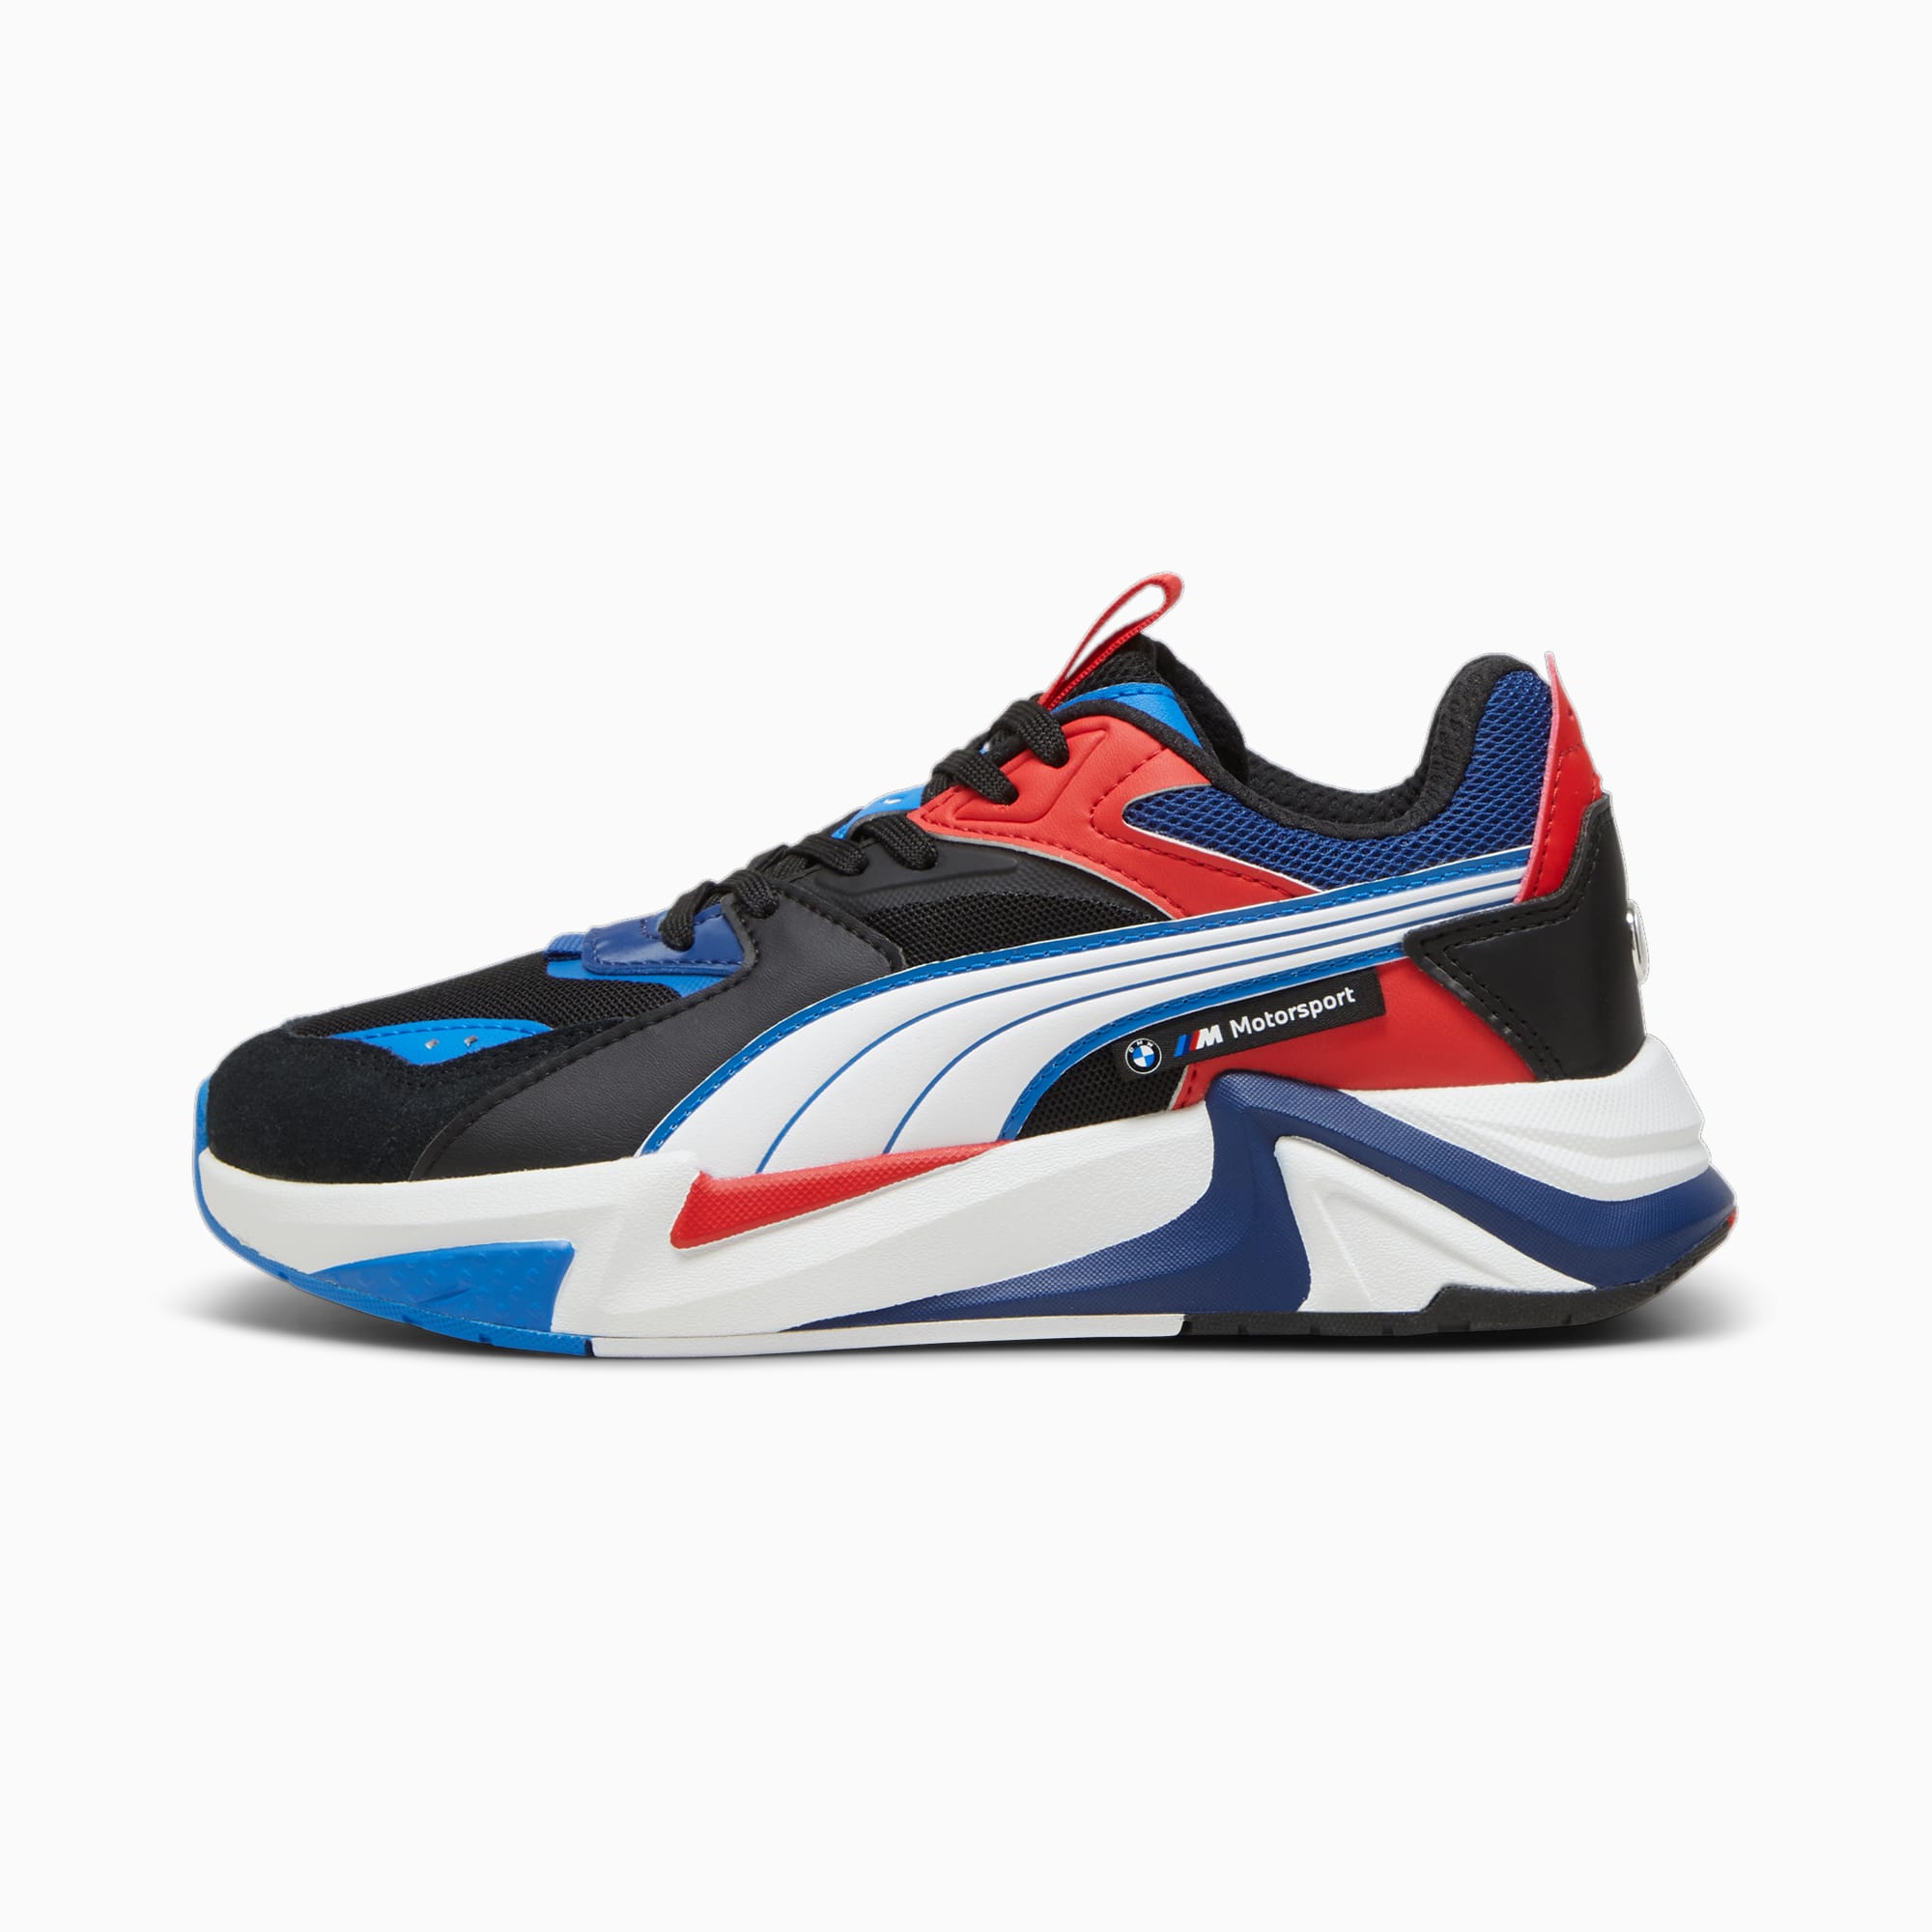 AUTHENTIC PUMA RS-Fast BMW MMS Black Red White Blue Athletic Shoes Men size